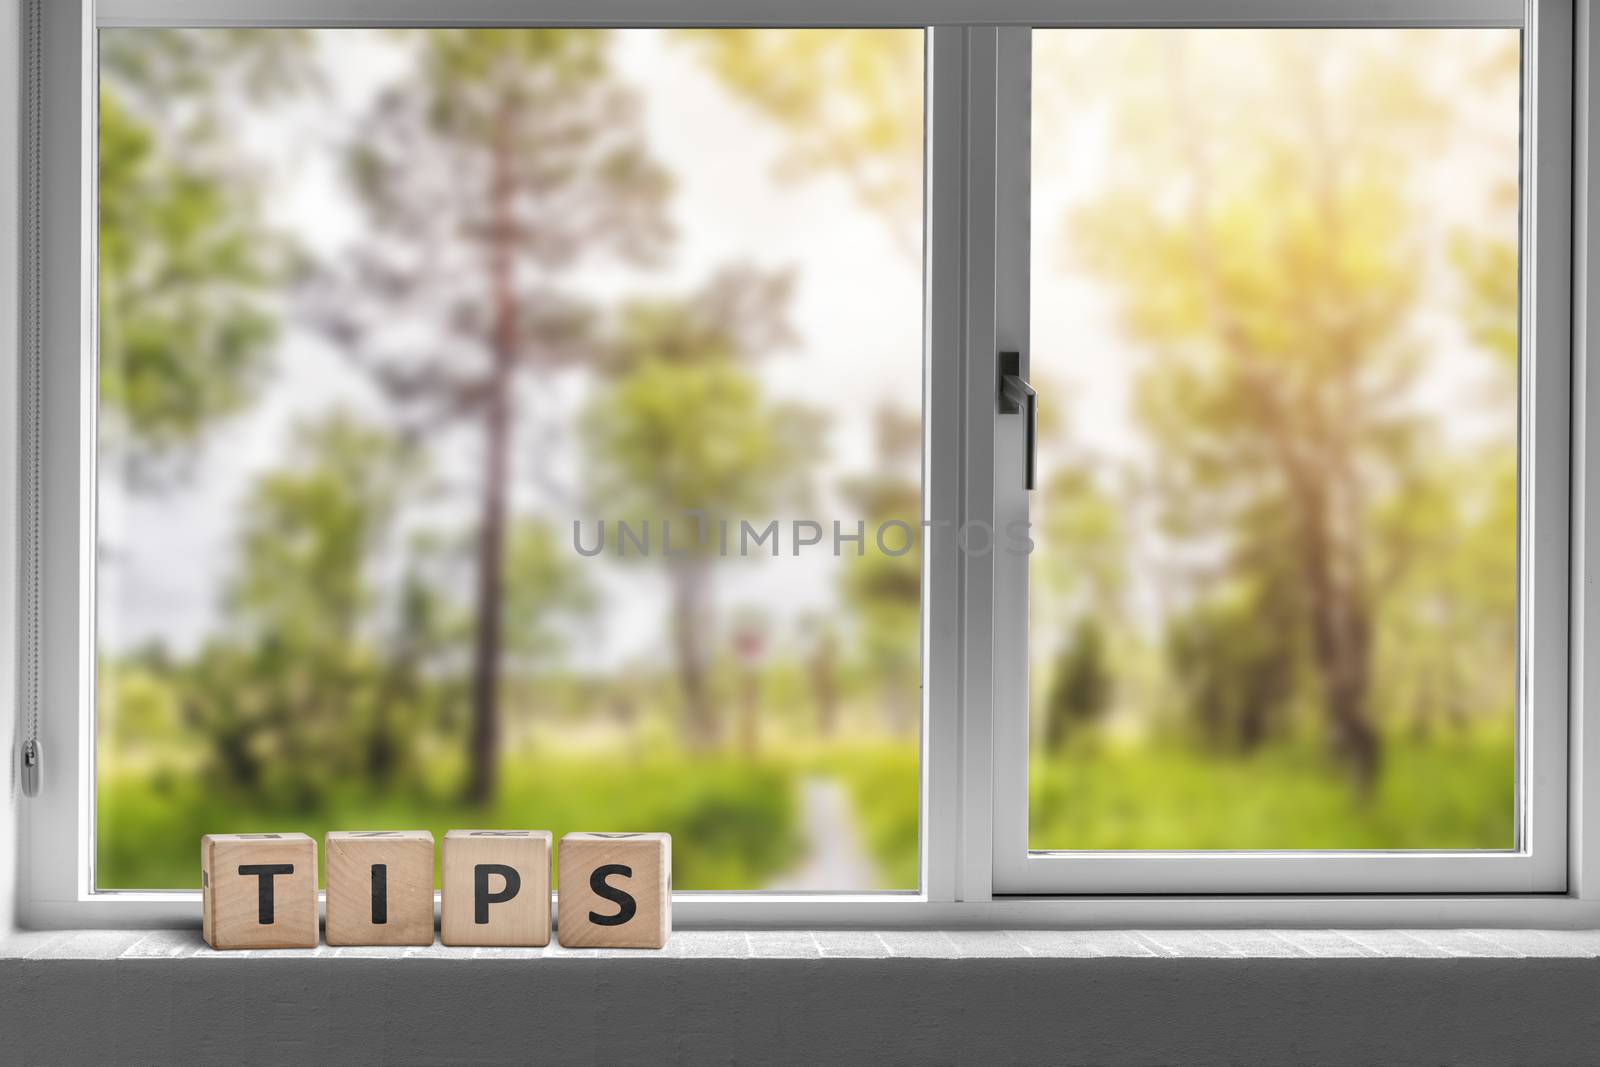 Tips sign in a window with a view to a green garden with tall trees in sunlight